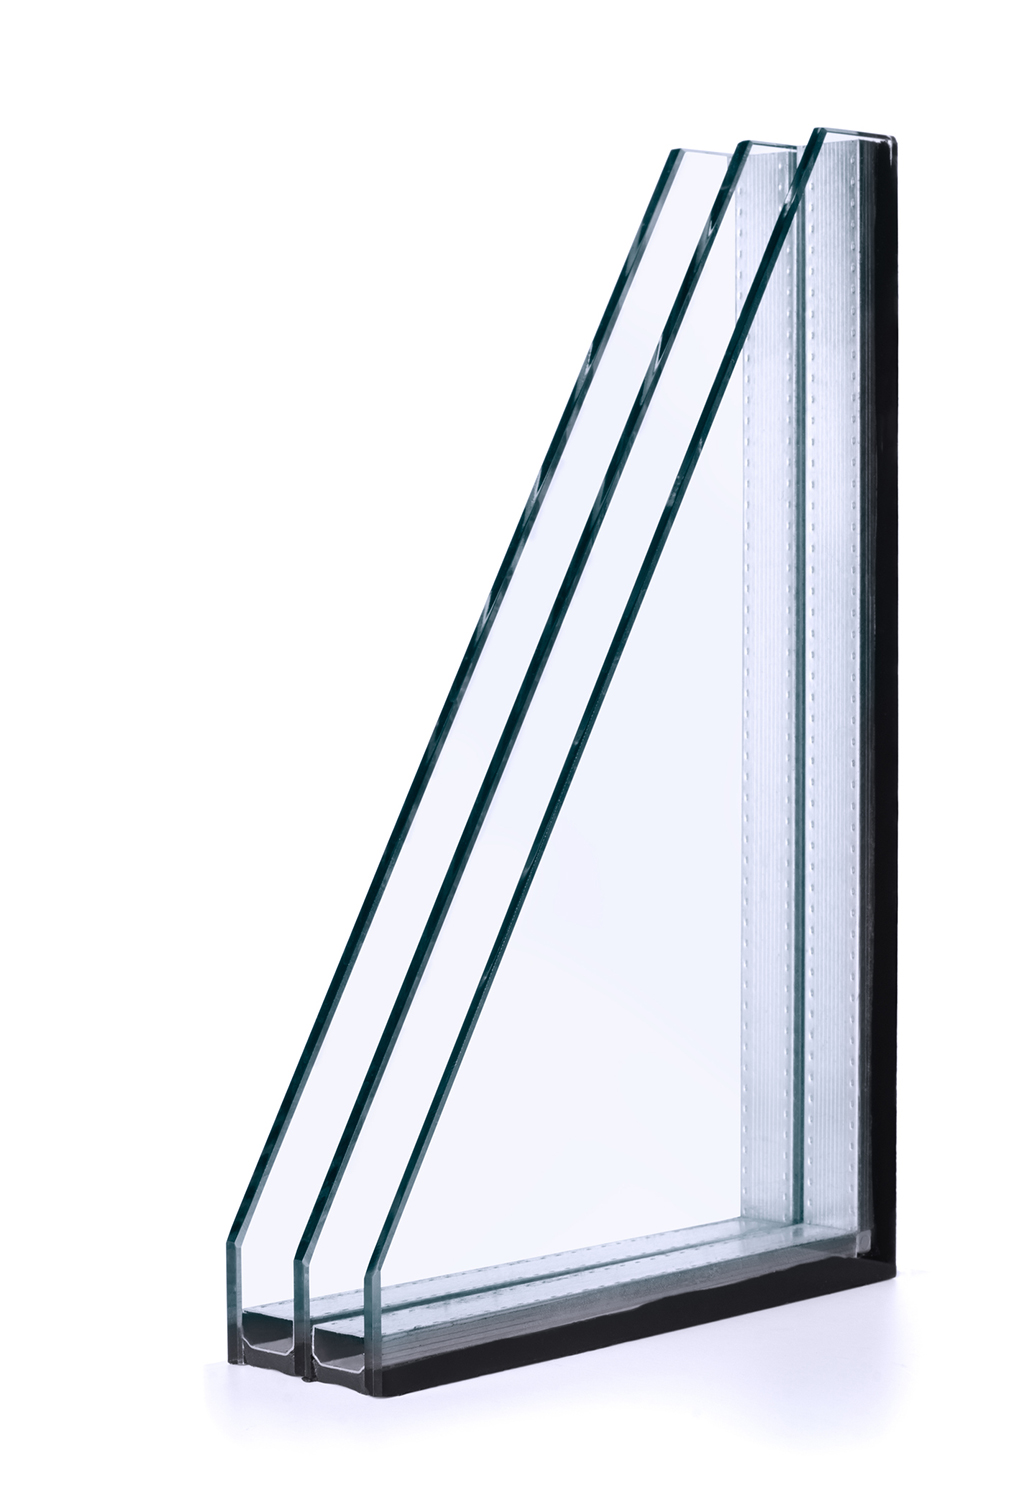 What You Need To Know About Triple Pane Windows | Dallas, TX